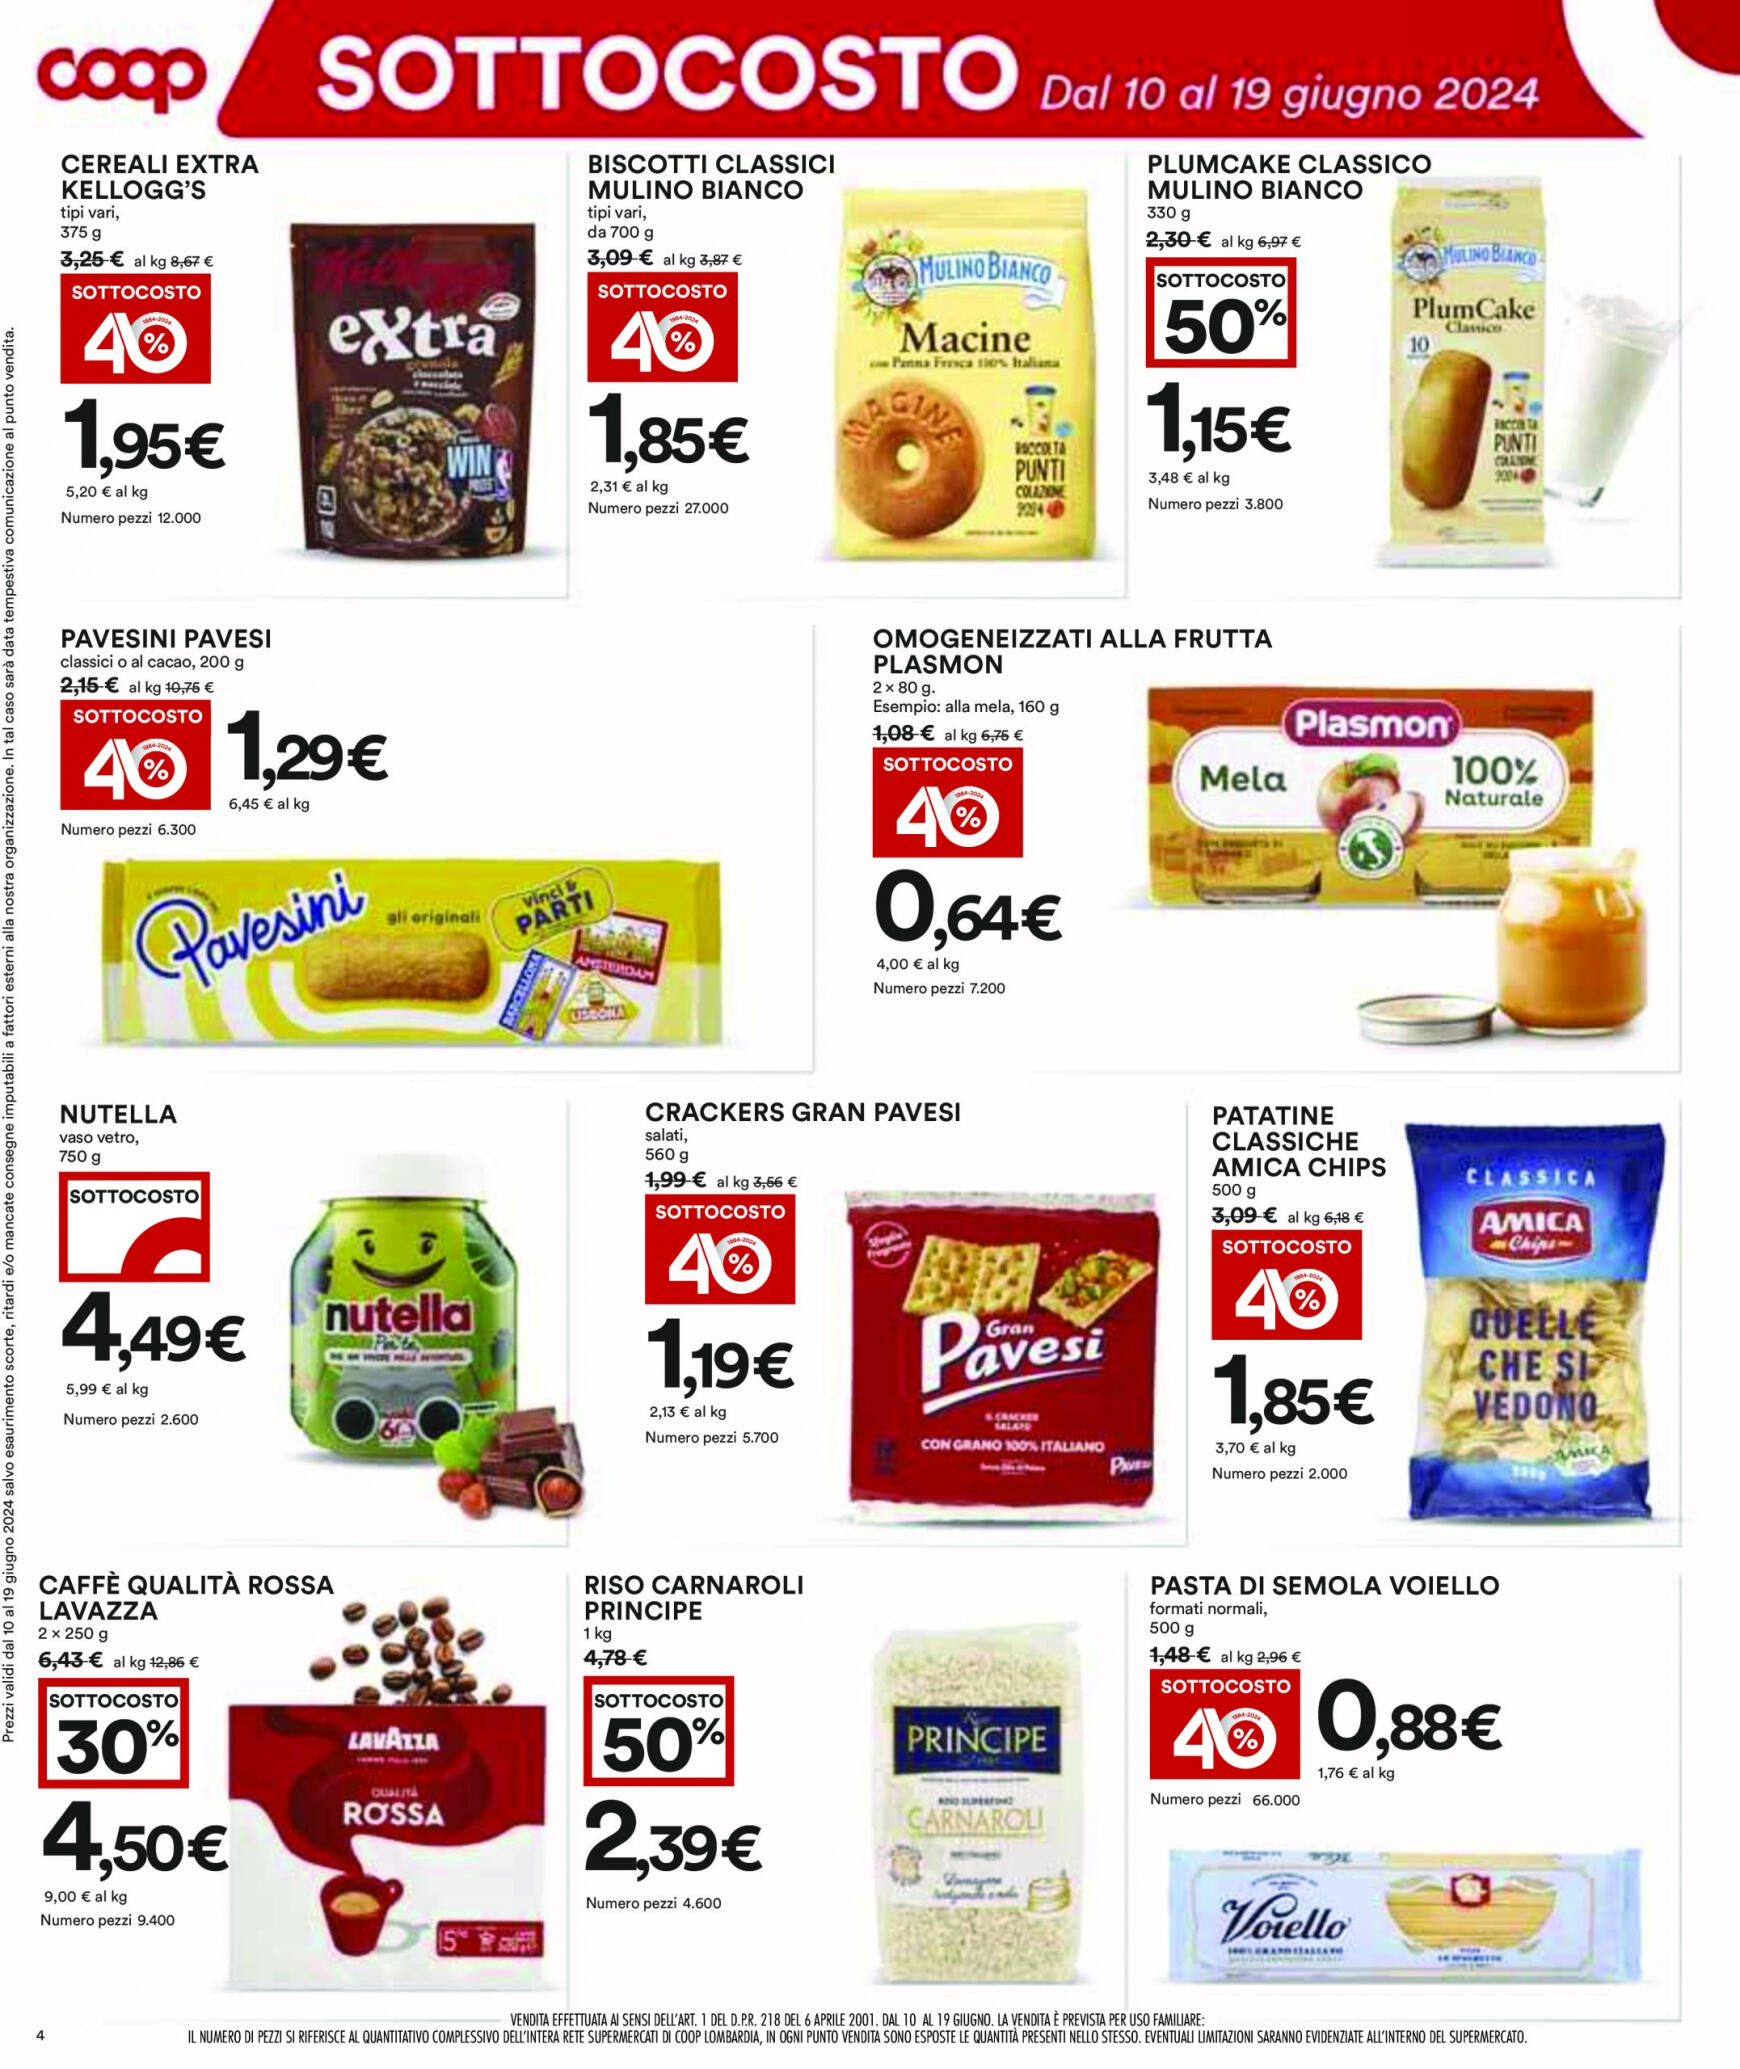 coop - Nuovo volantino Coop 10.06. - 19.06. - page: 4